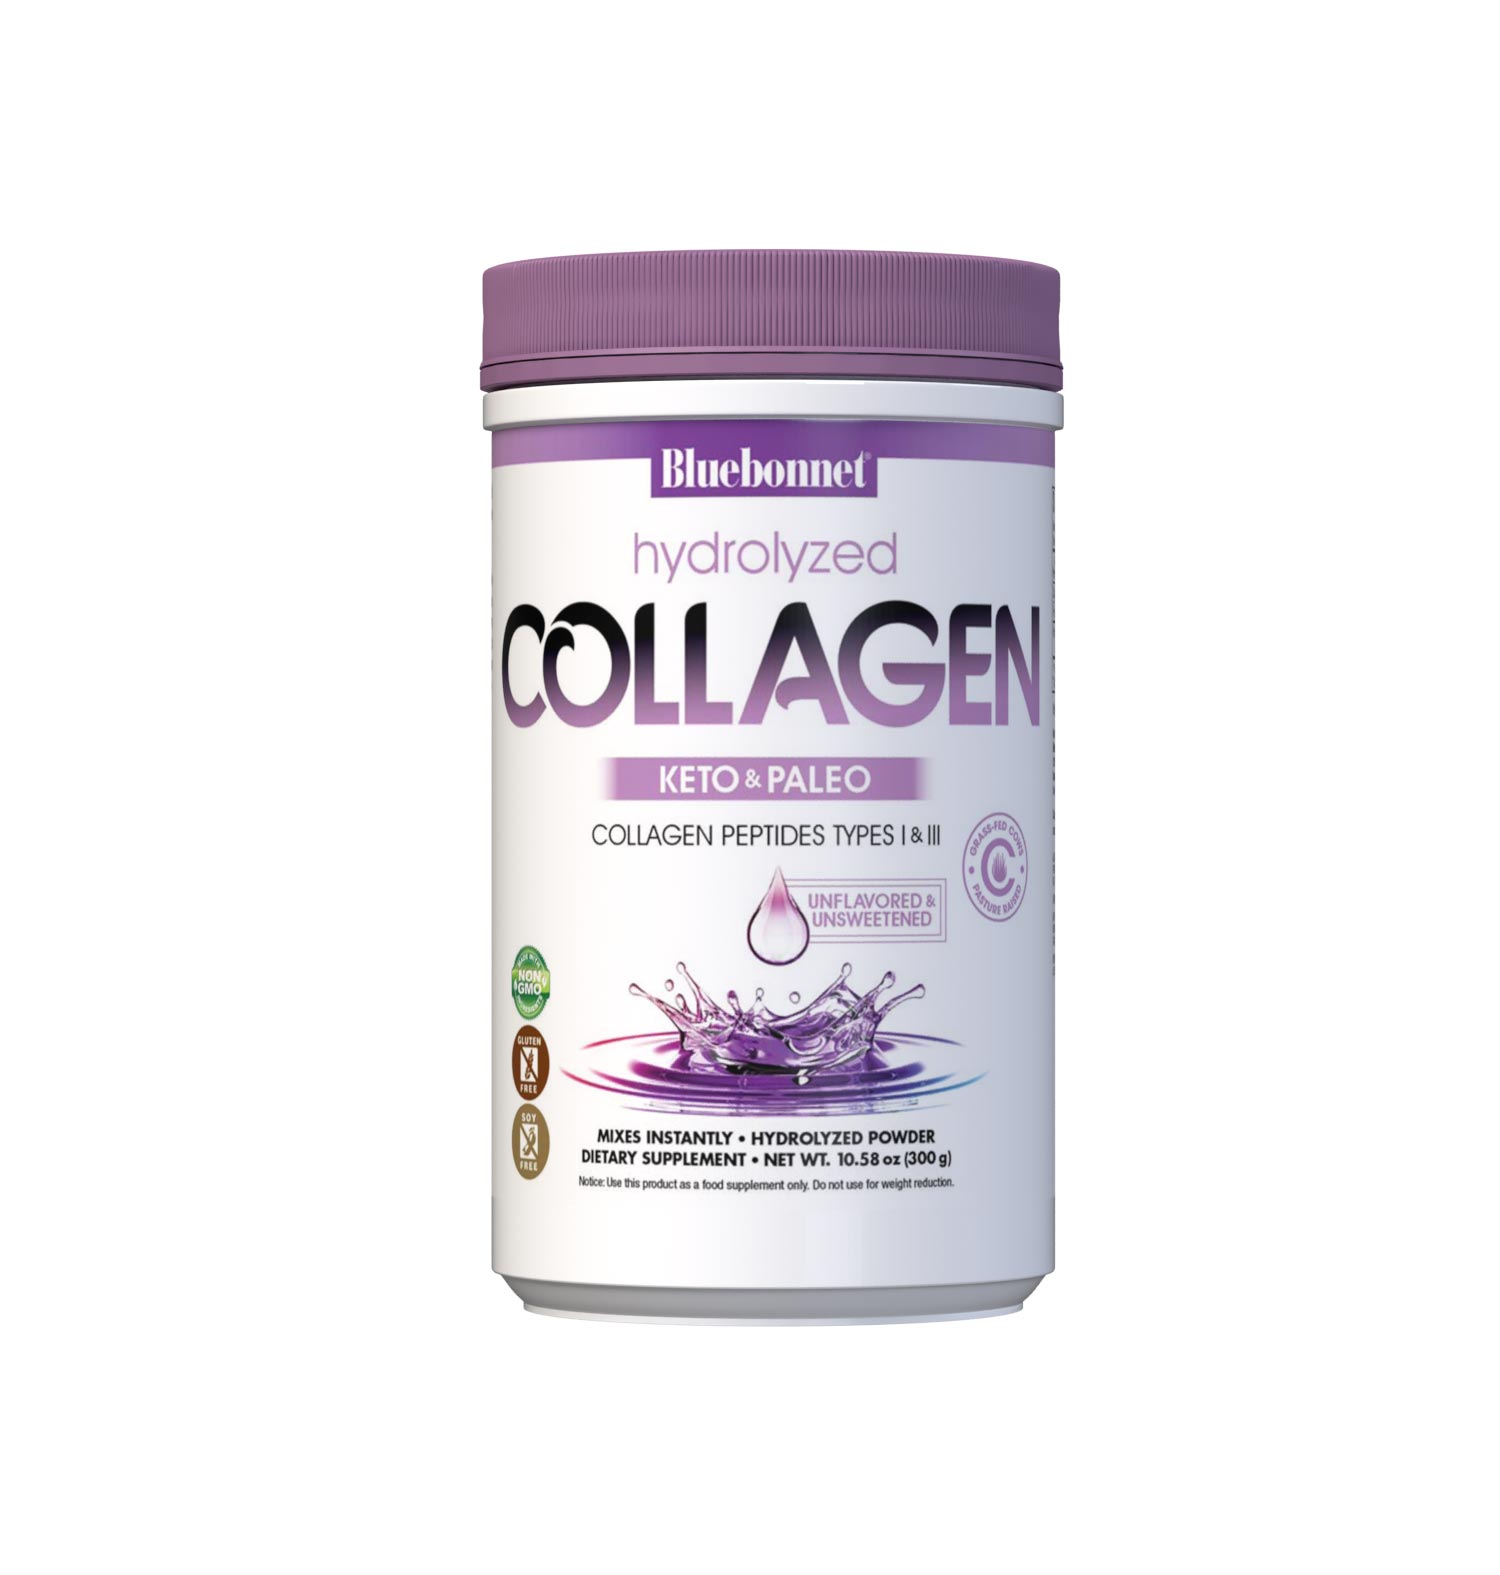 Bluebonnet’s HYDROLYZED COLLAGEN Powder (10.58 oz canister) is carefully crafted to revive hair, skin and nails as part of a daily beauty regimen with collagen peptides types I & III that are sourced from grass-fed cows. Collagen peptides help to replenish nutrients lost over time by boosting collagen production, which helps to strengthen hair and nails while supporting the skin’s hydration balance and elasticity to counteract visible signs of aging. #size_10.58 oz